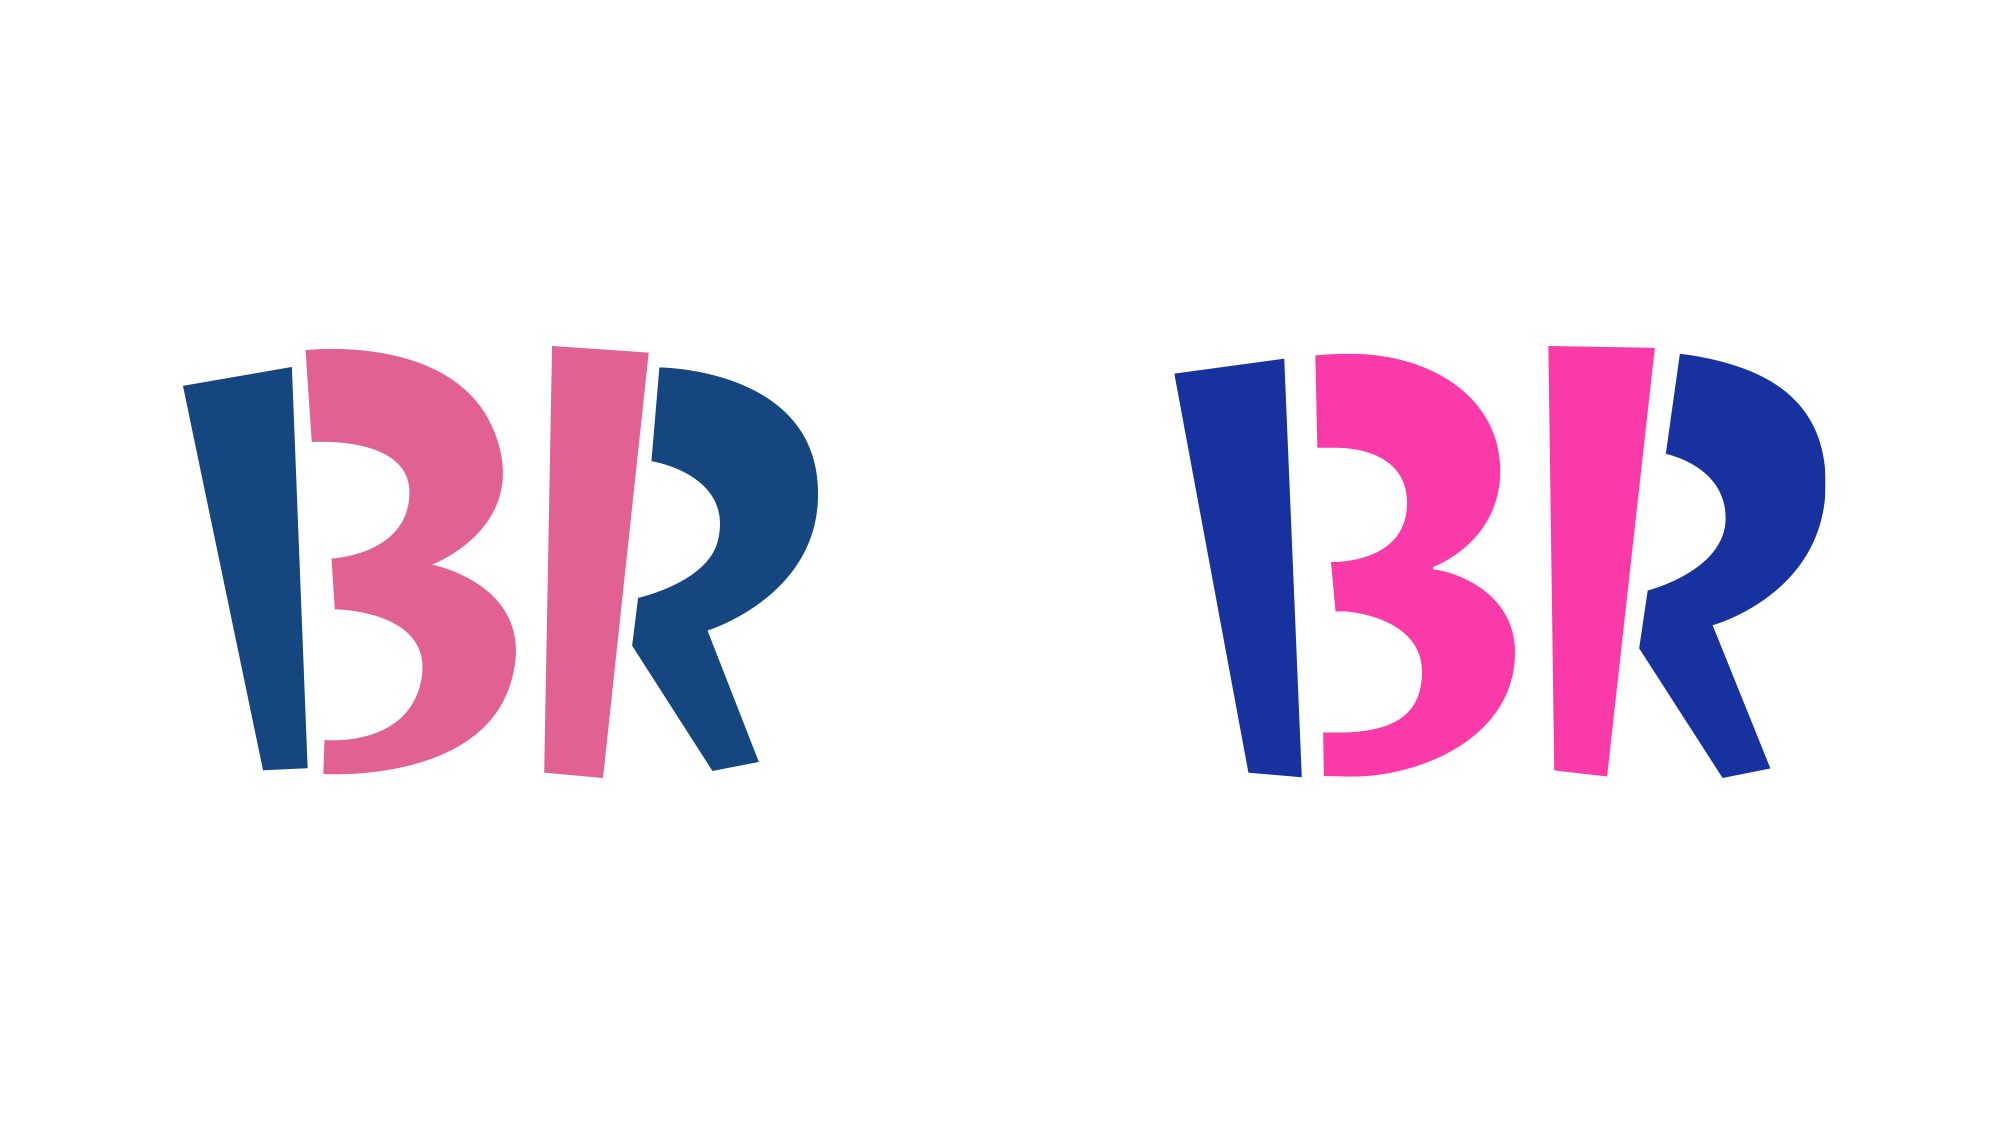 New Logo and Identity for Baskin Robbins by Jones Knowles Ritchie